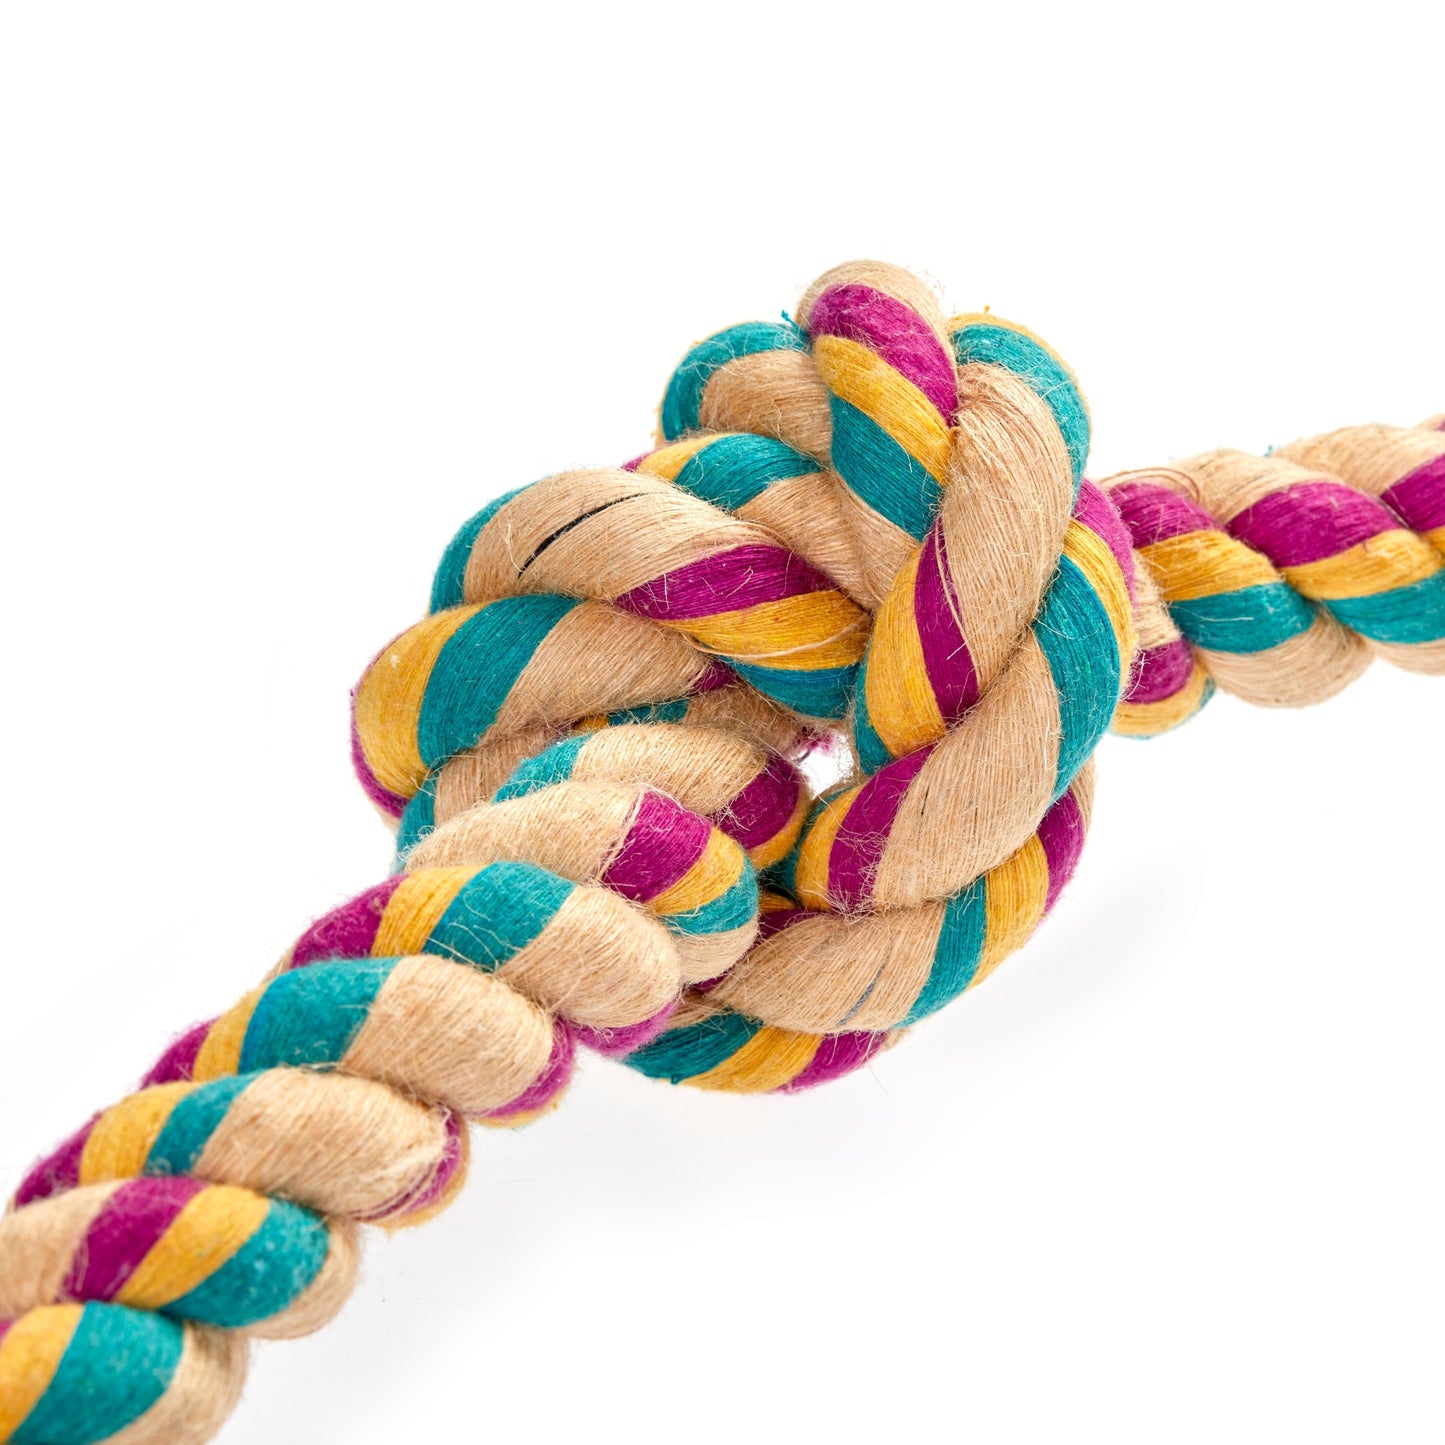 Big Rope 3 knot, Eco Toy